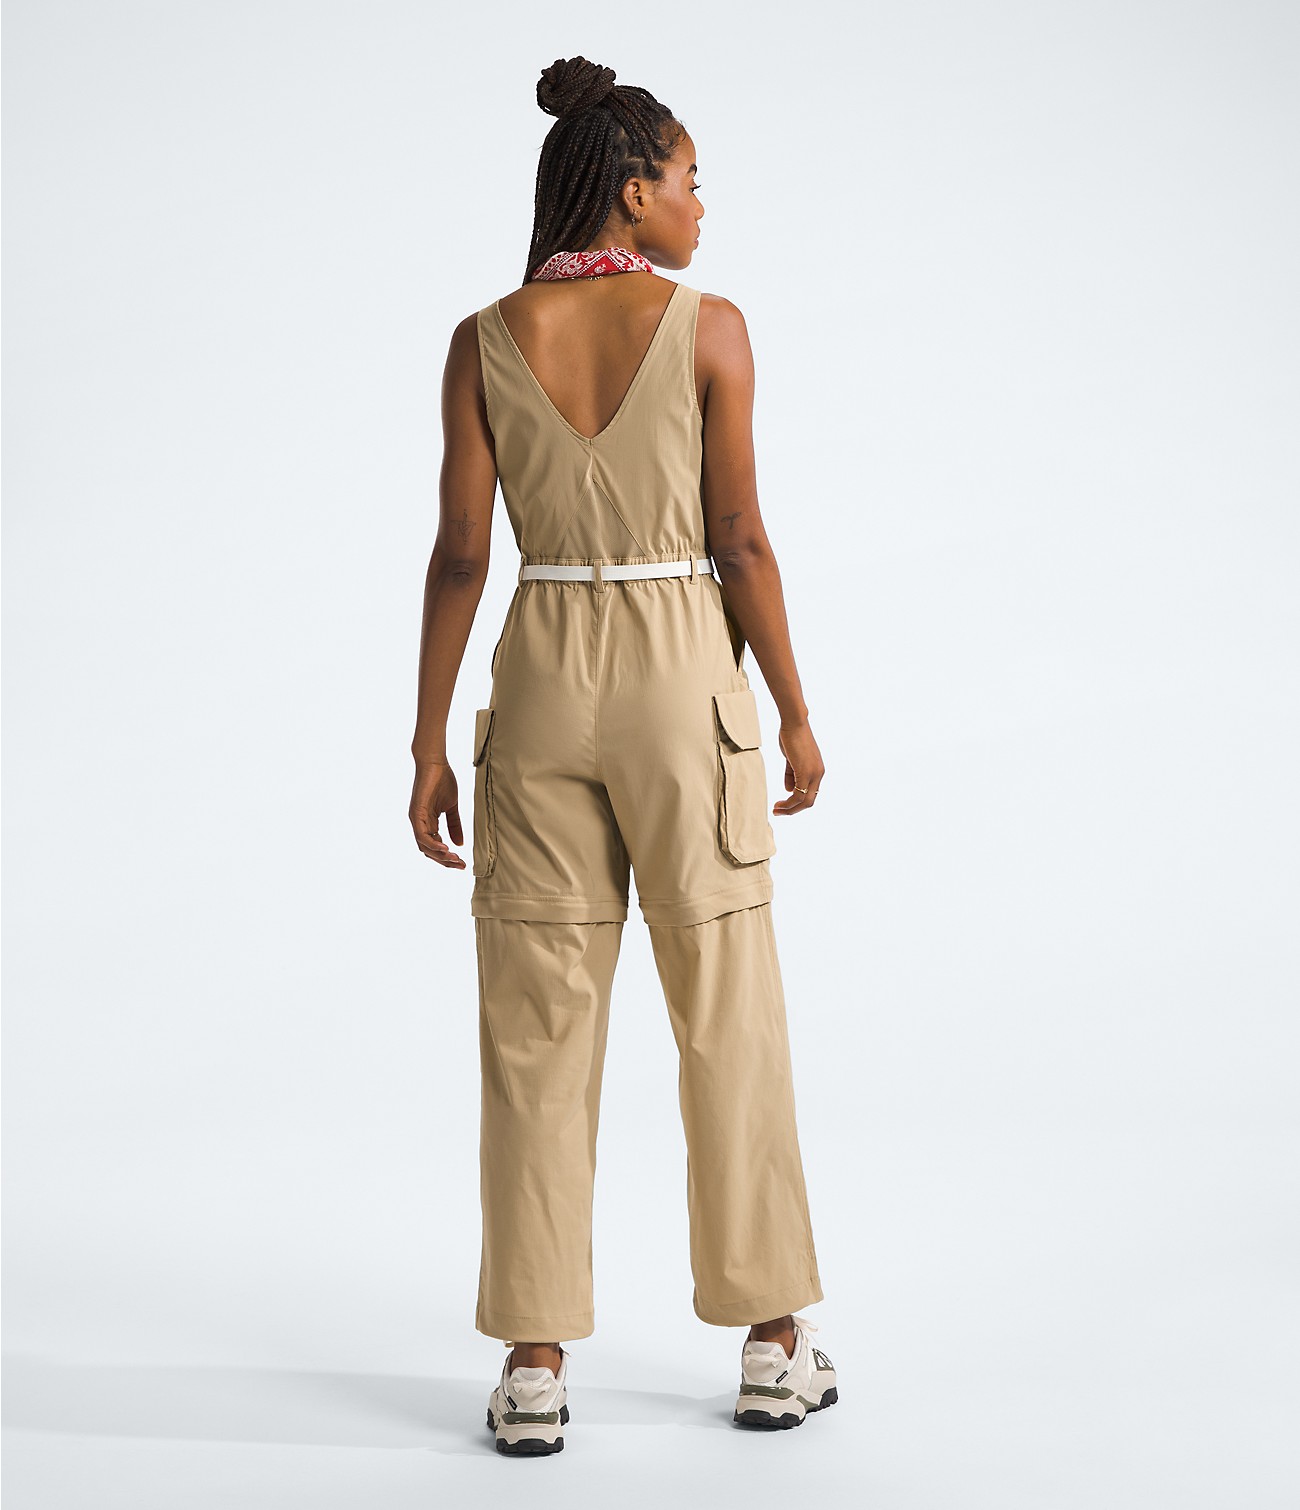 Women’s Class V Pathfinder One-Piece | The North Face